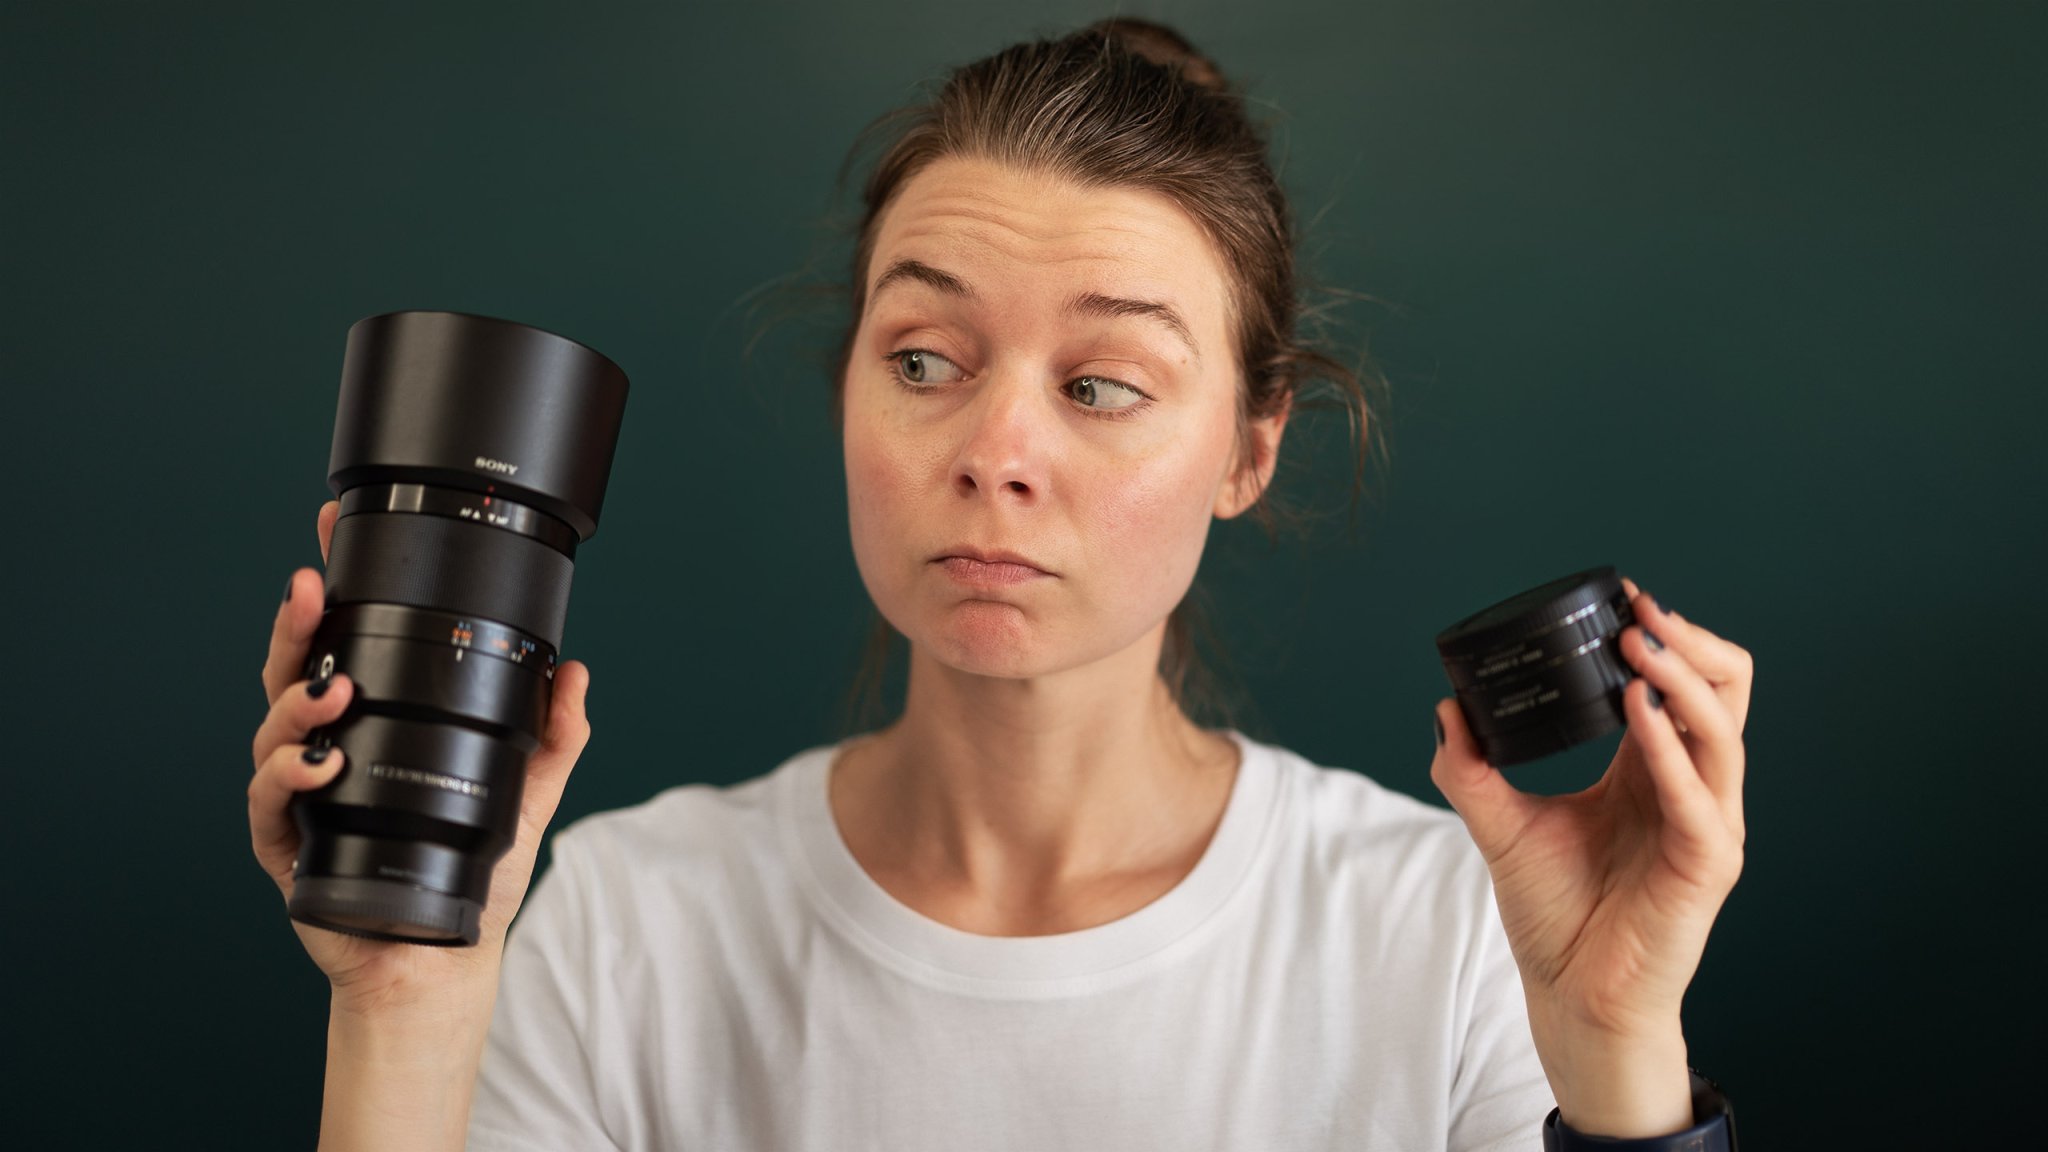 Macro lenses vs. extension tubes: Which one should you choose?